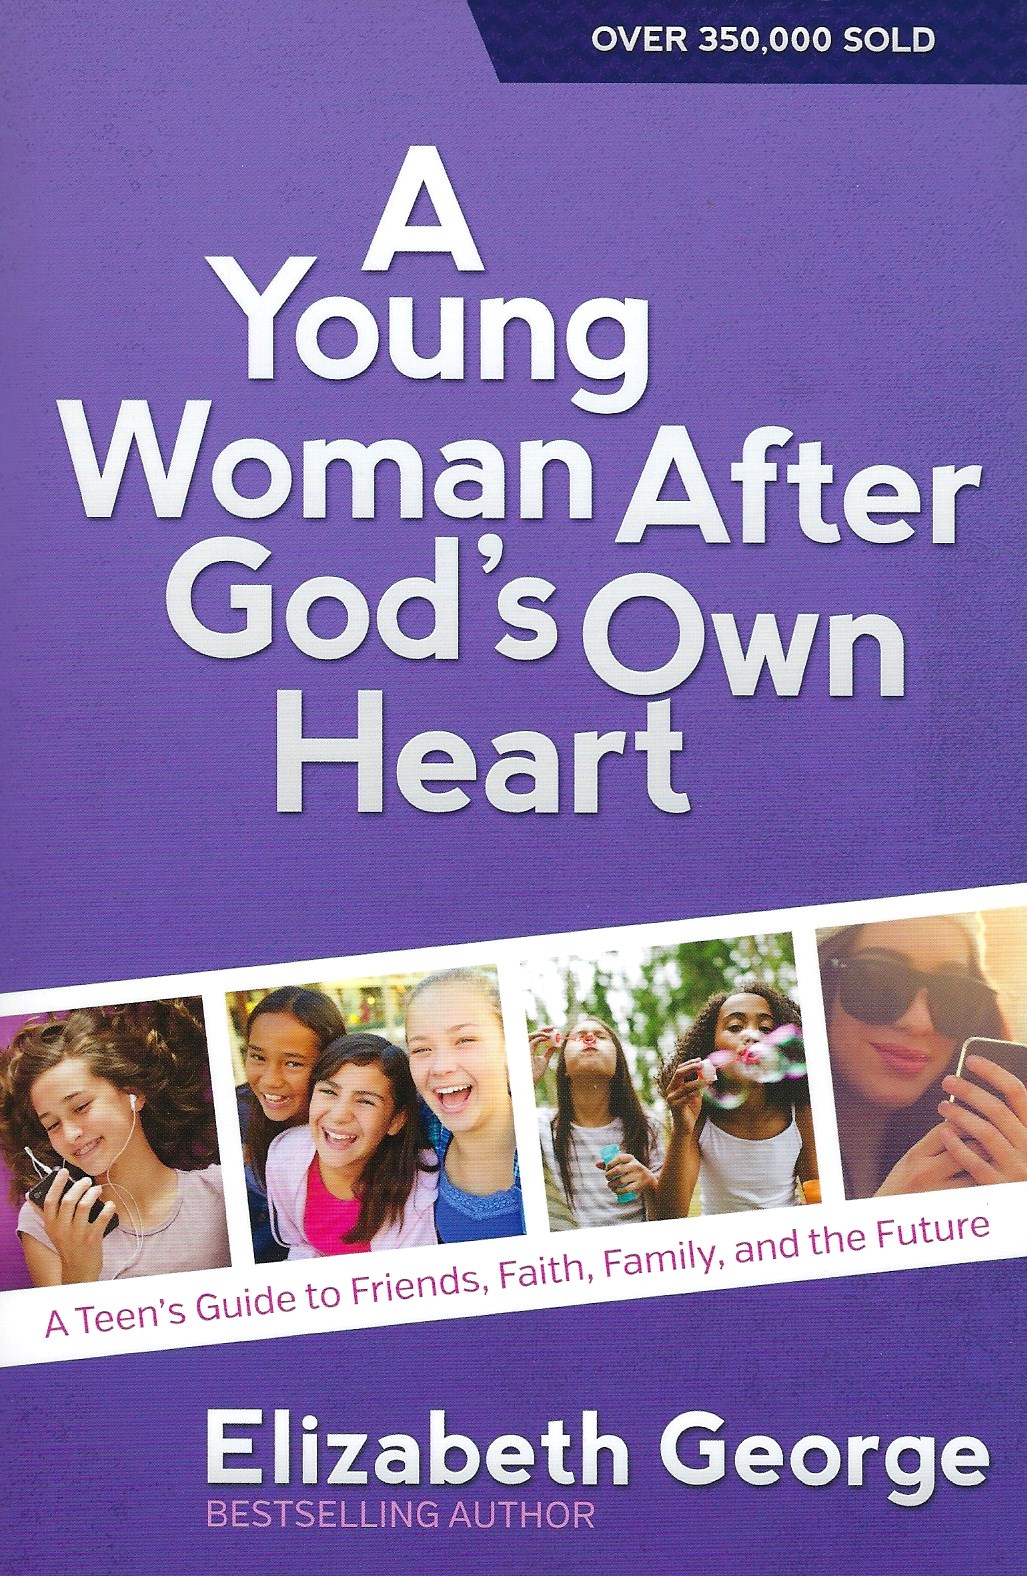 A YOUNG WOMAN AFTER GOD'S OWN HEART Elizabeth George